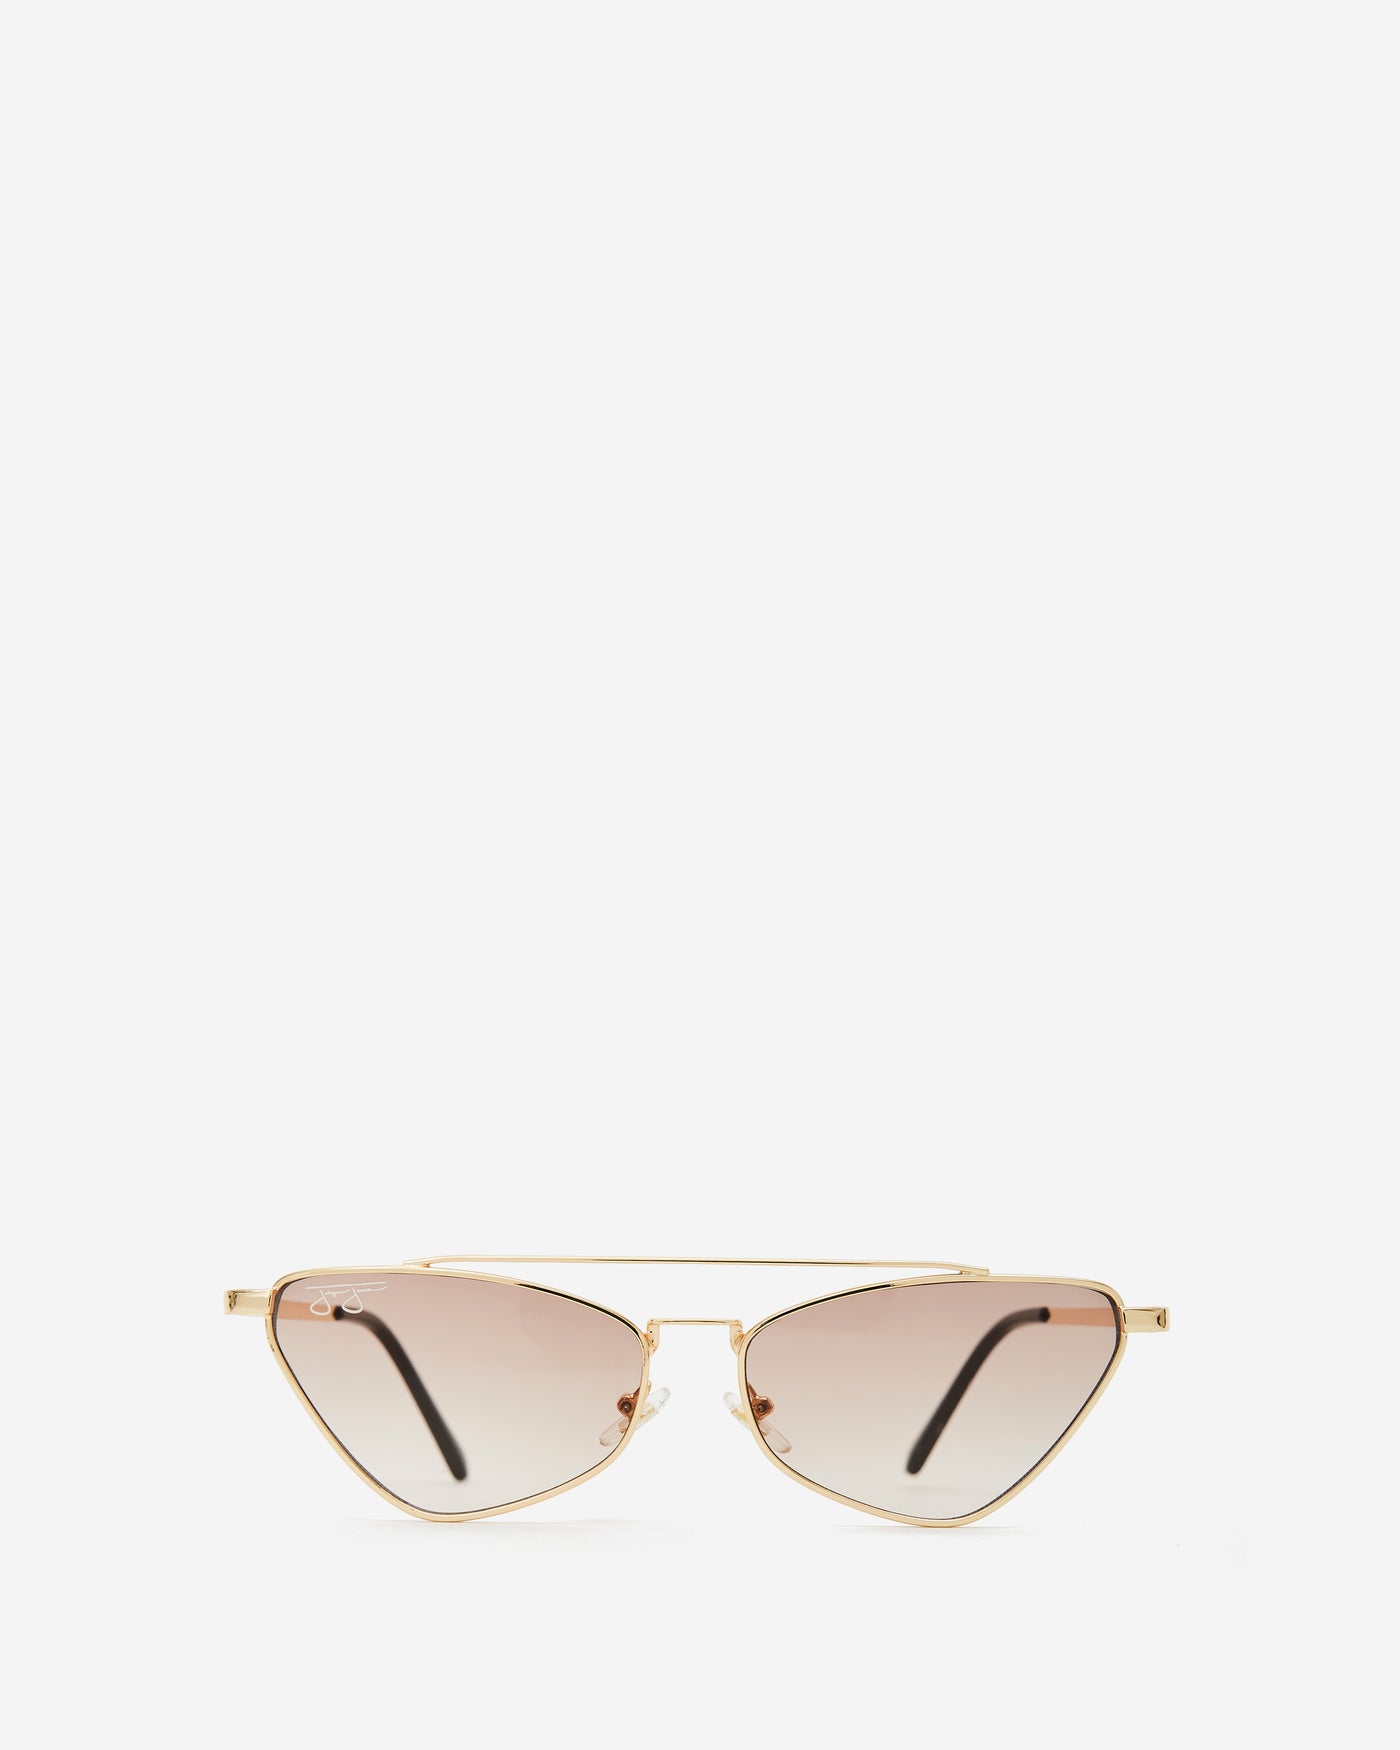 Geometric Frame Sunglasses - Gold Metal Frame with Gold Lens Sunglasses Joey James, The Label   